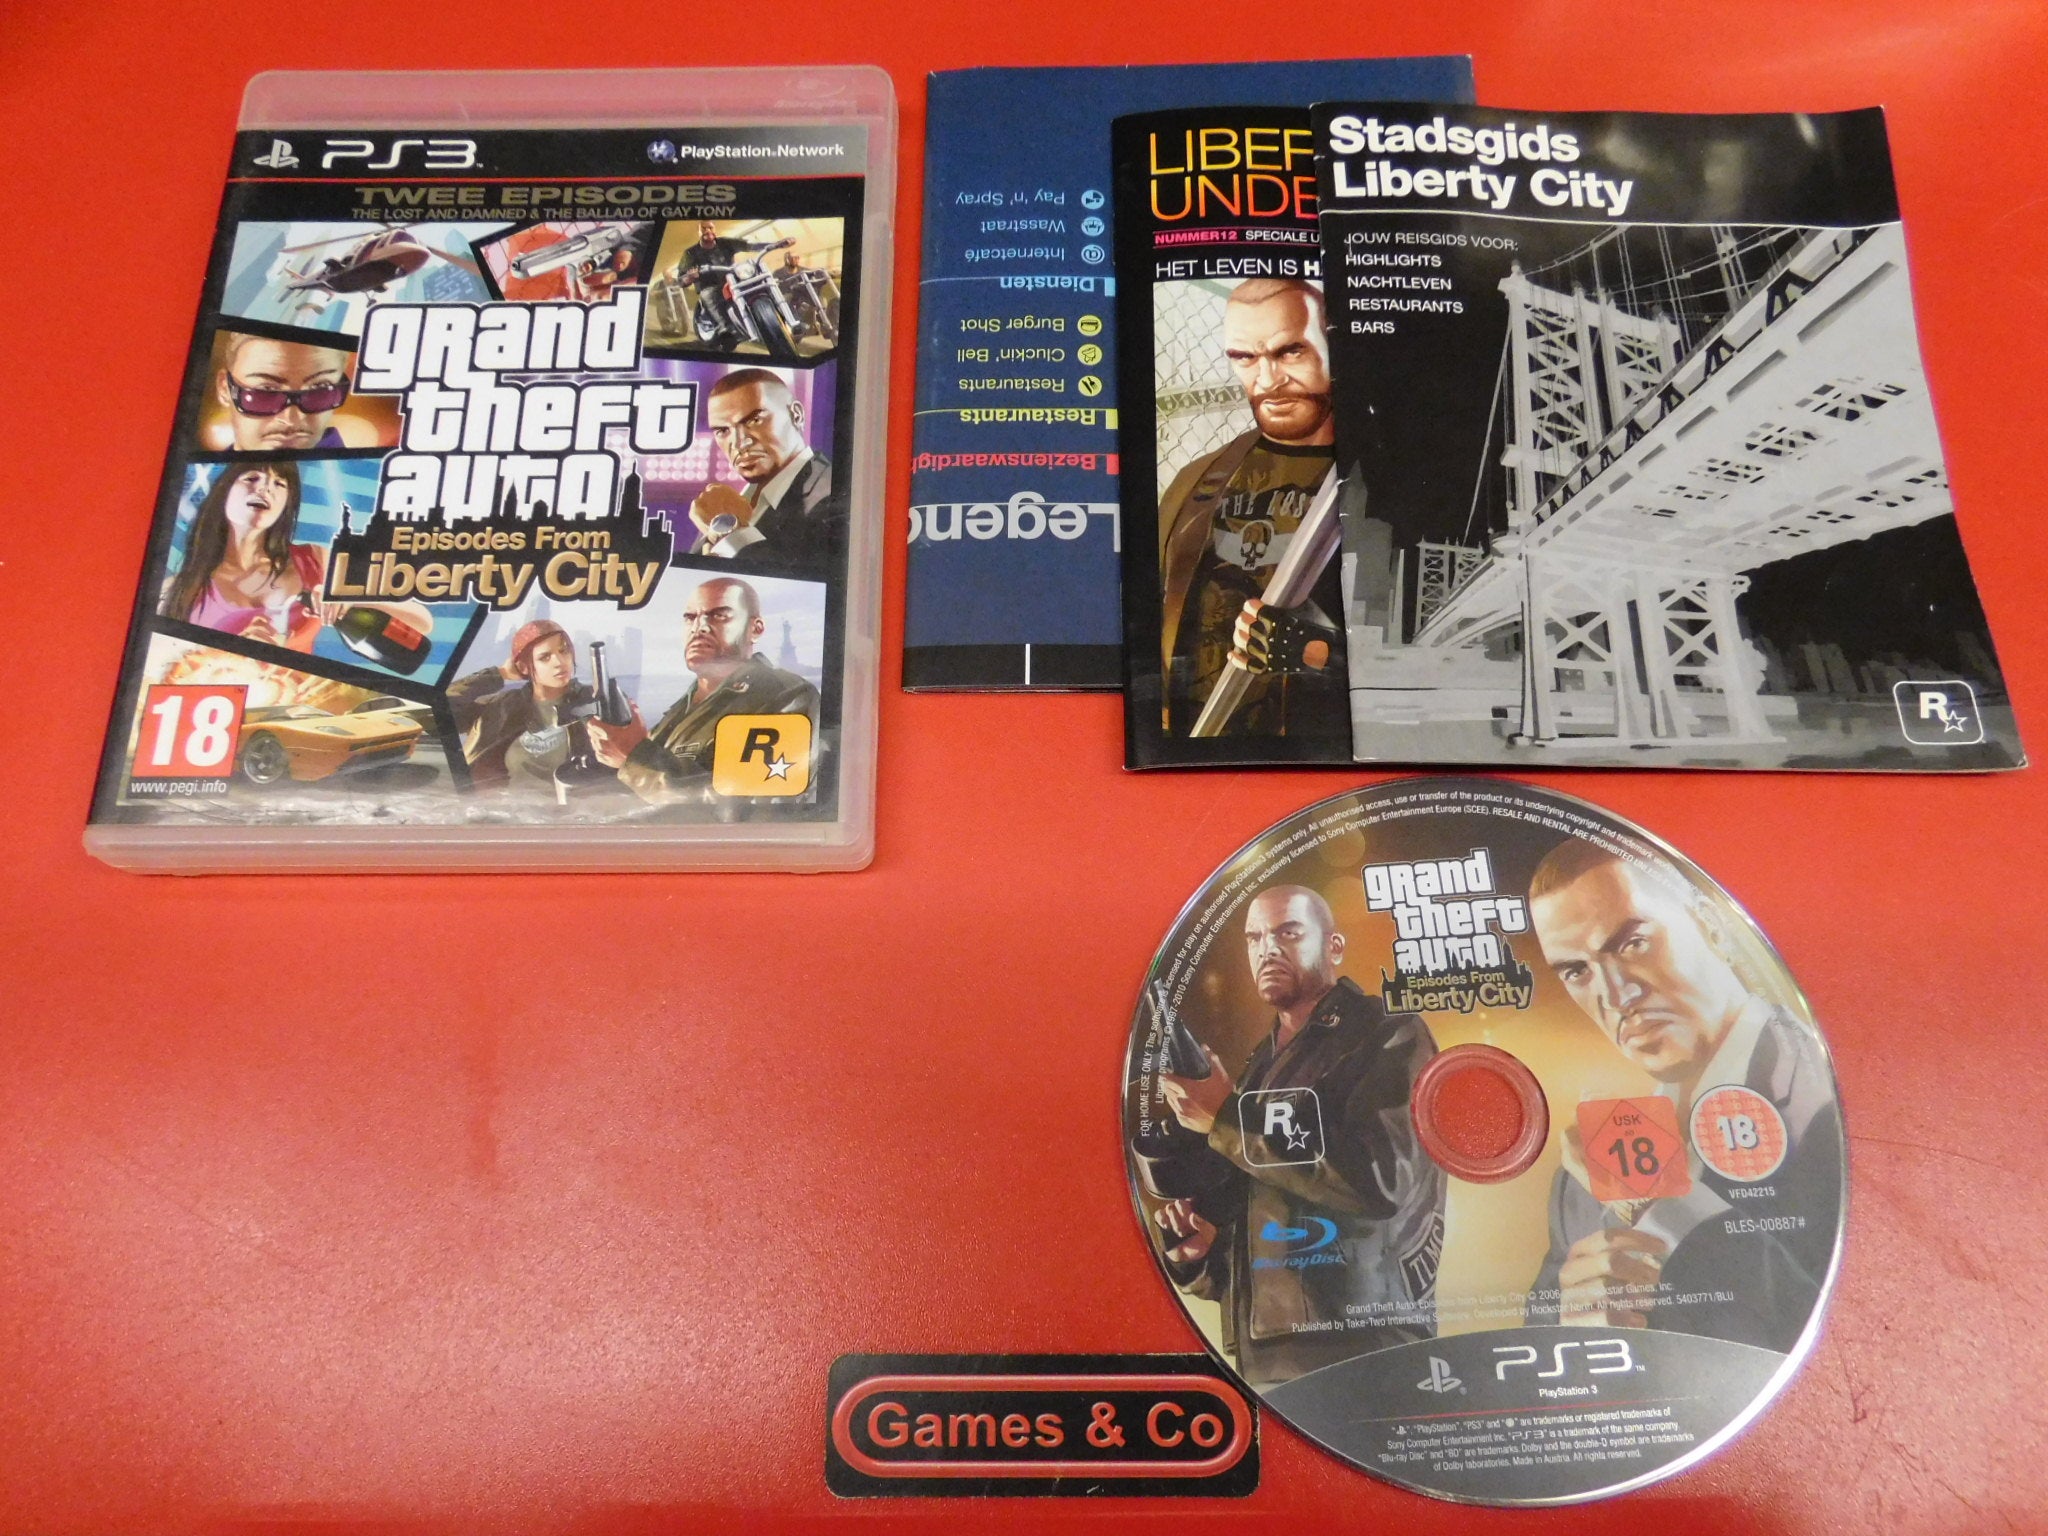 GRAND THEFT AUTO IV & EPISODES FROM LIBERTY CITY